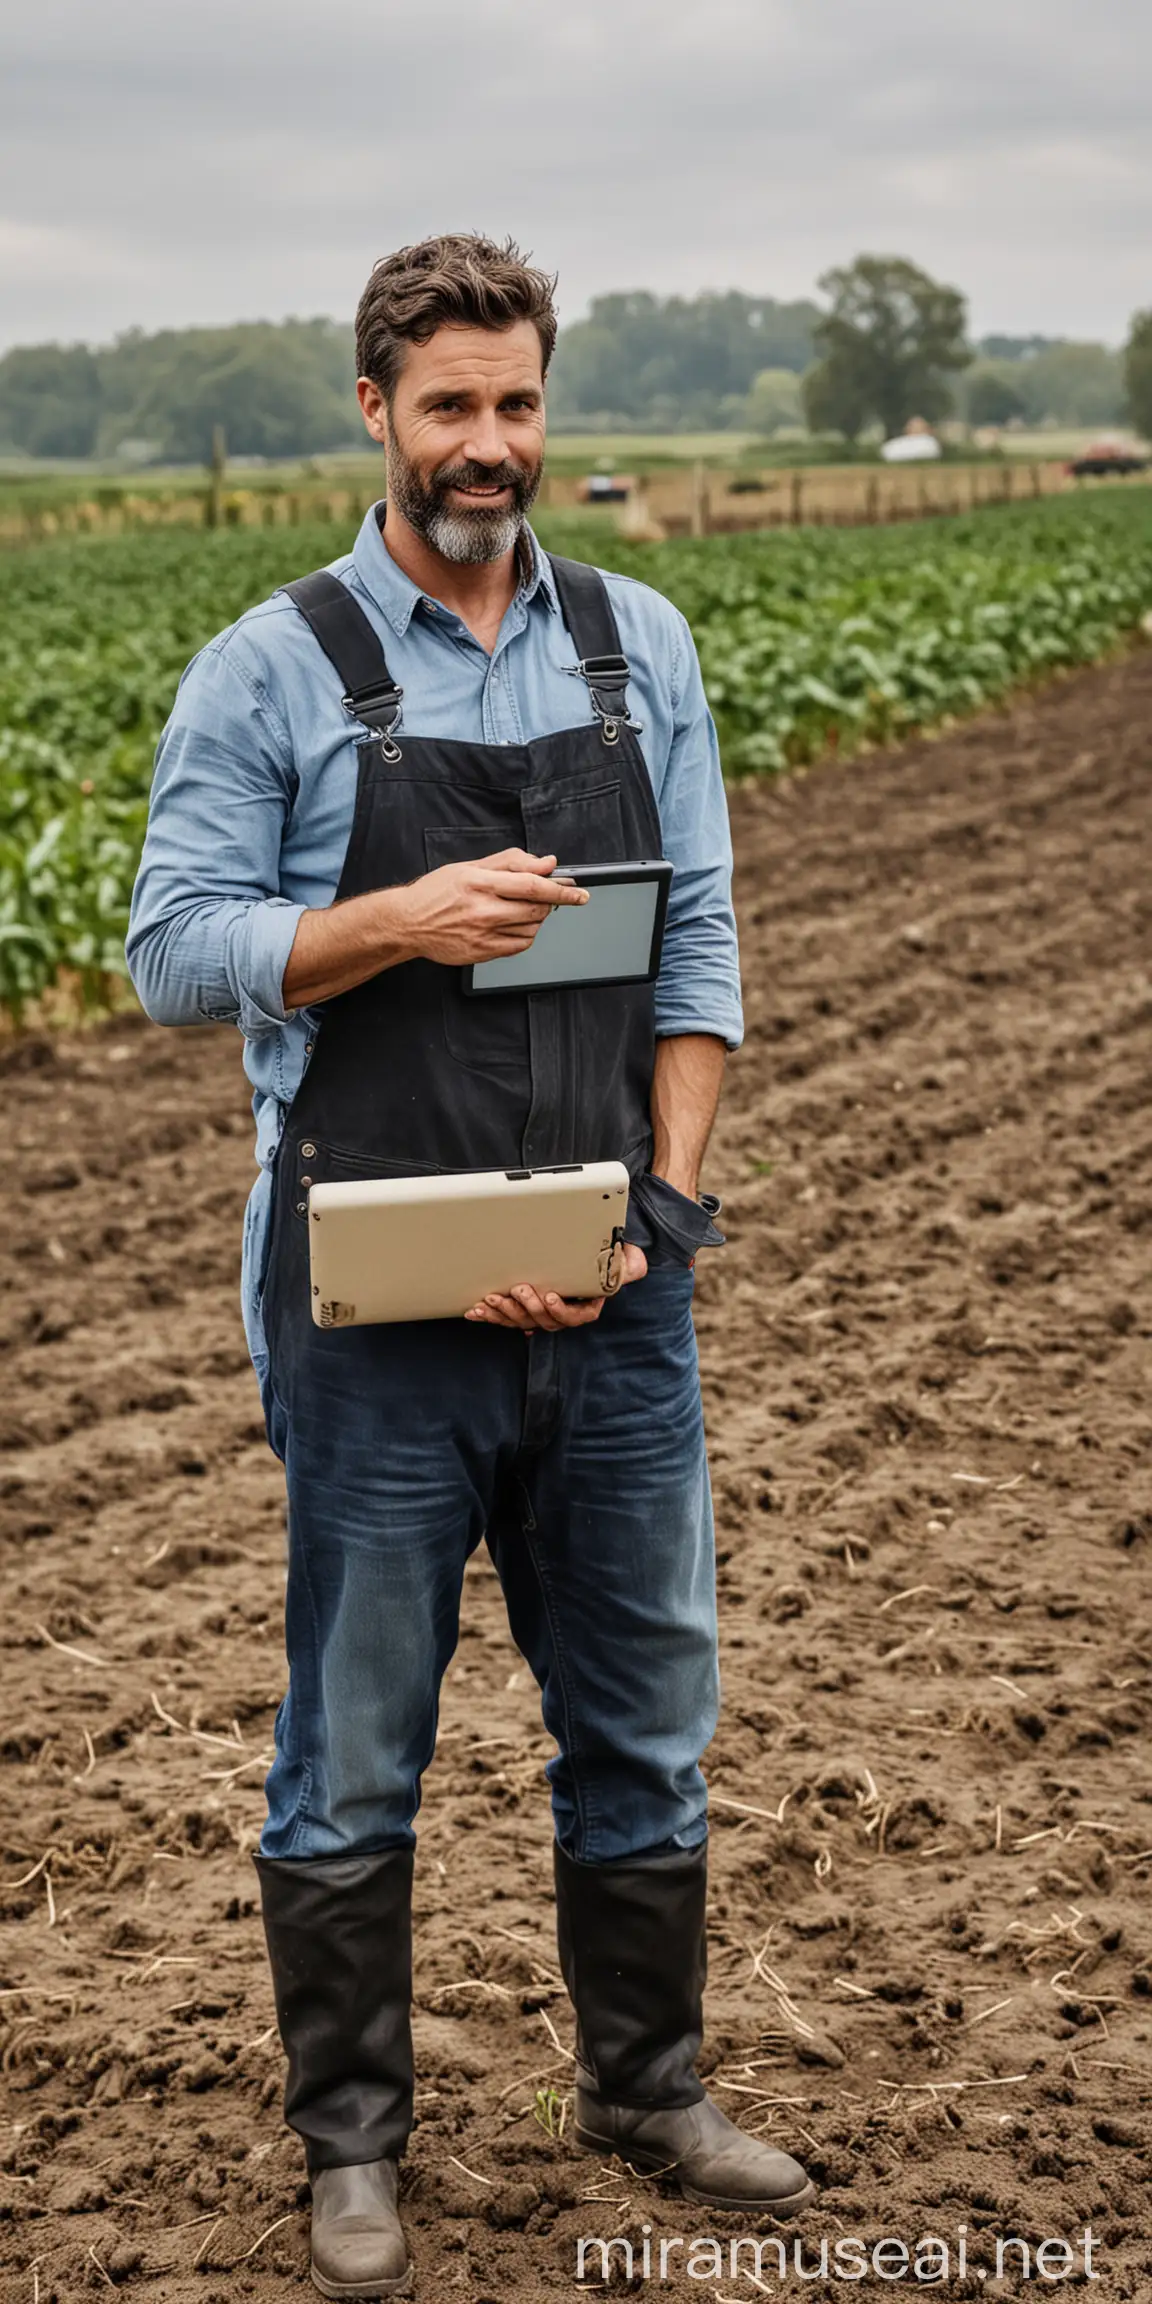 TechSavvy Farmer Using Control Tablet in Modern Agricultural Setting